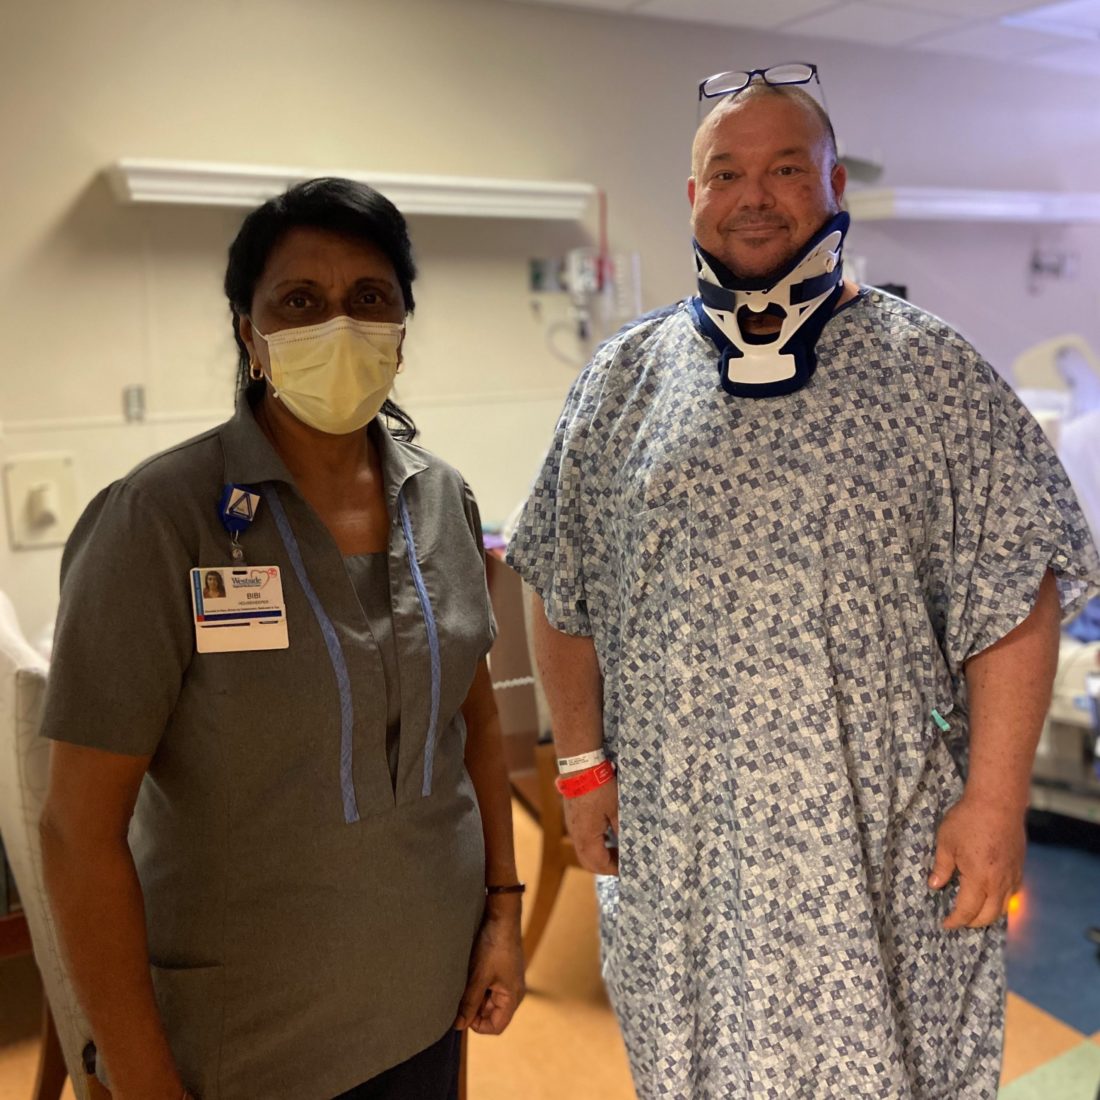 Female hospital worker standing with a male patient in a hospital gown and wearing a neck brace. 